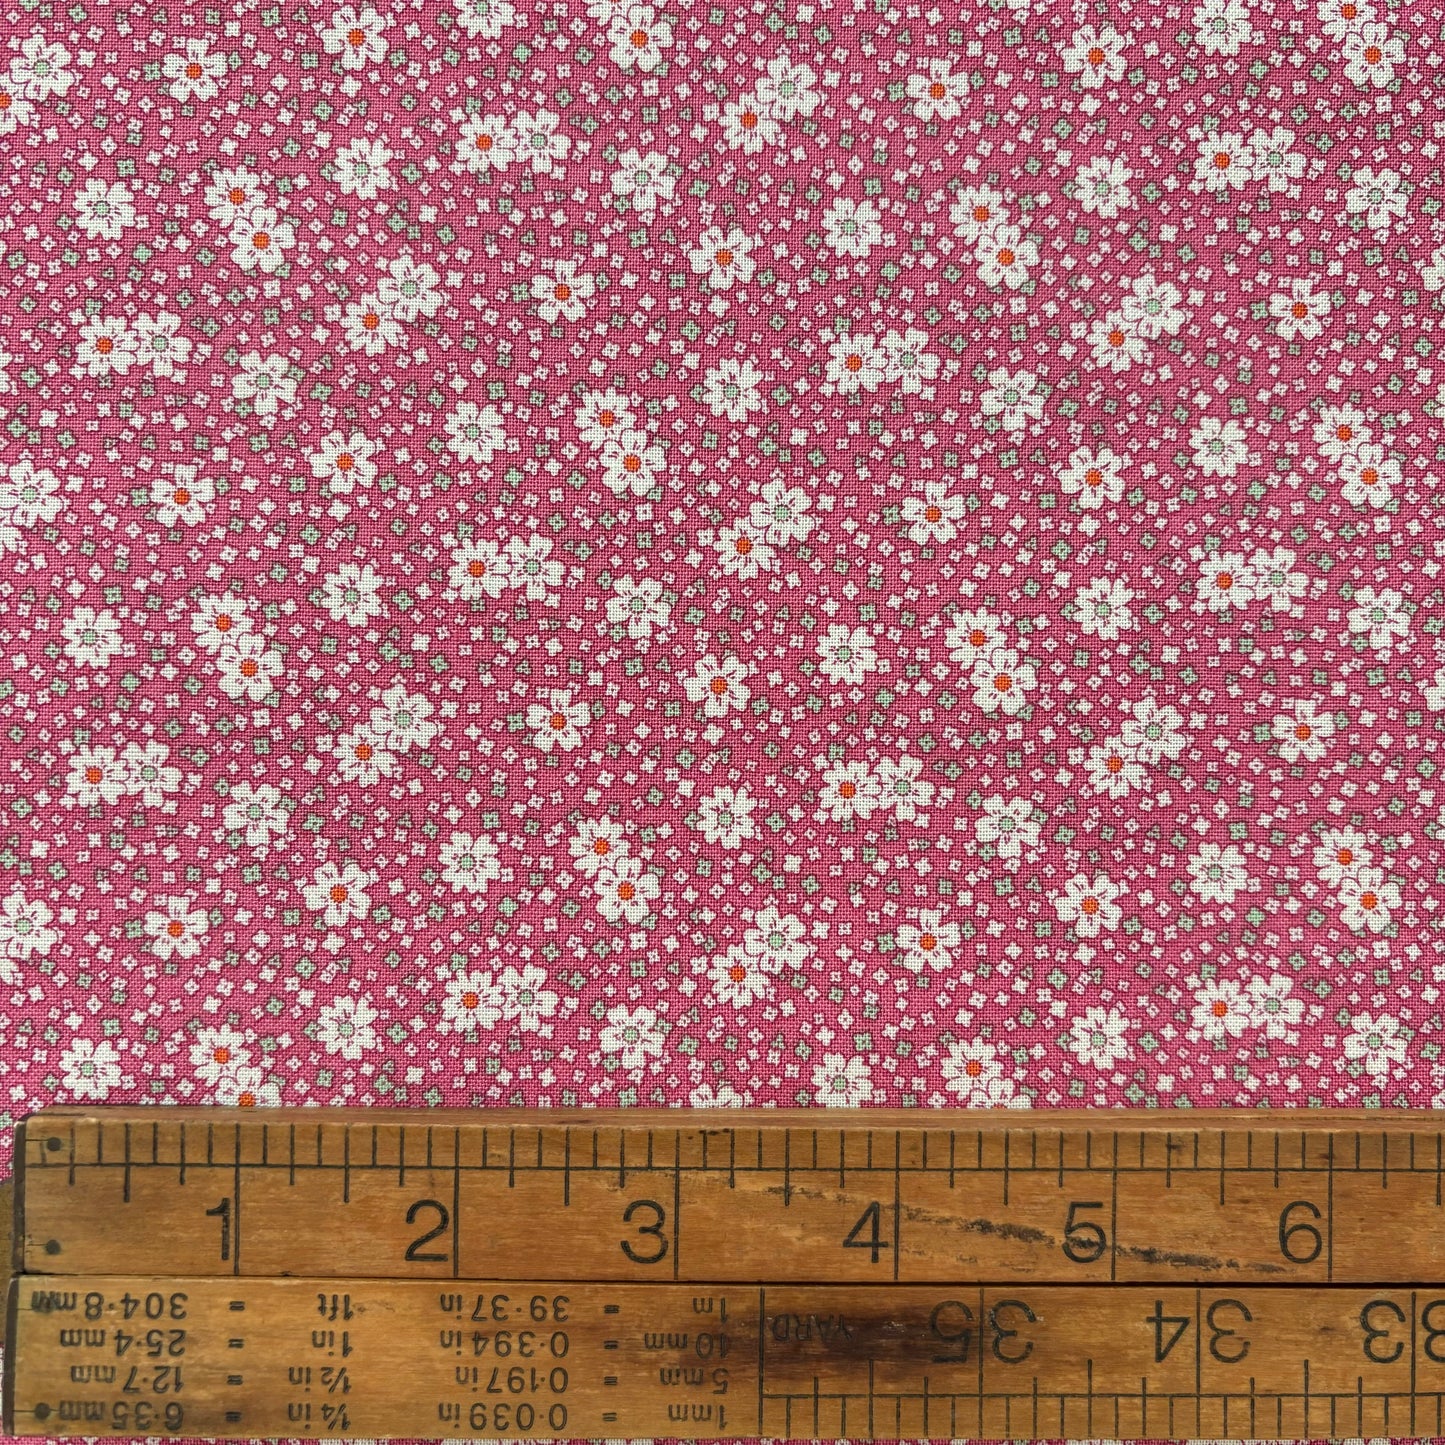 Aunt Grace Calicos by Judie Rothermel for Marcus Fabrics - Blooms Pink